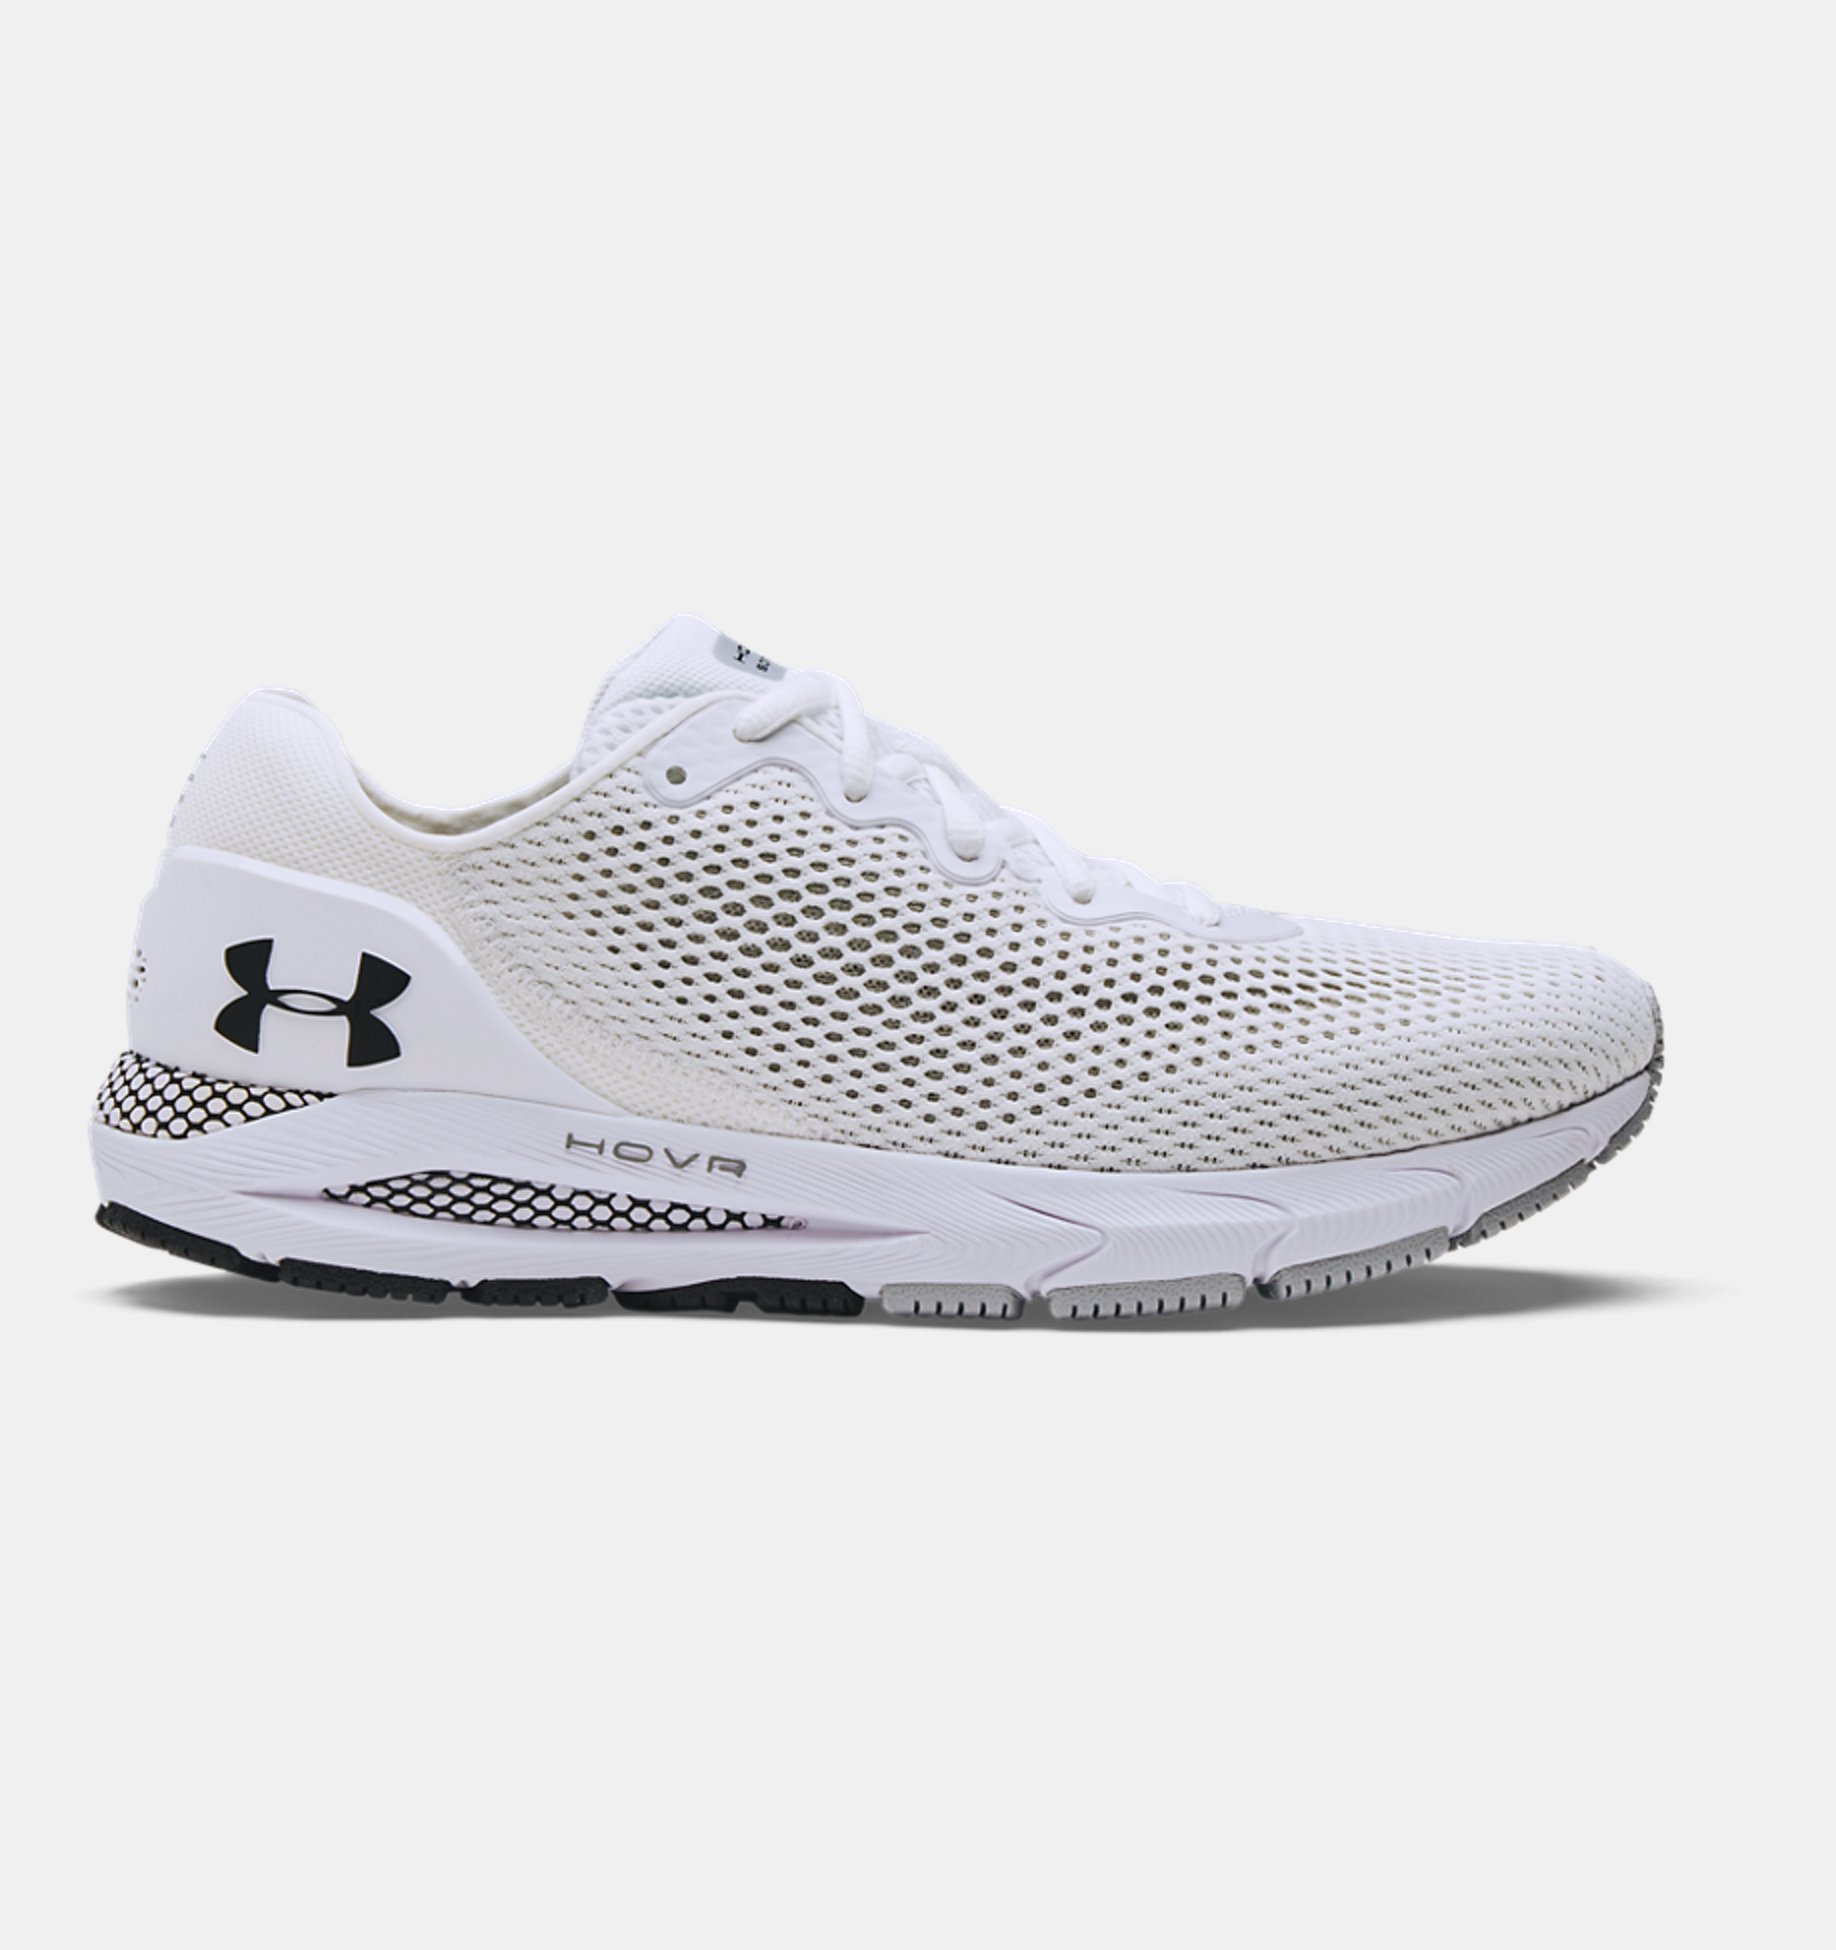 Under Armour Men HOVR Sonic 4 Running Shoe Fast Free Shipping